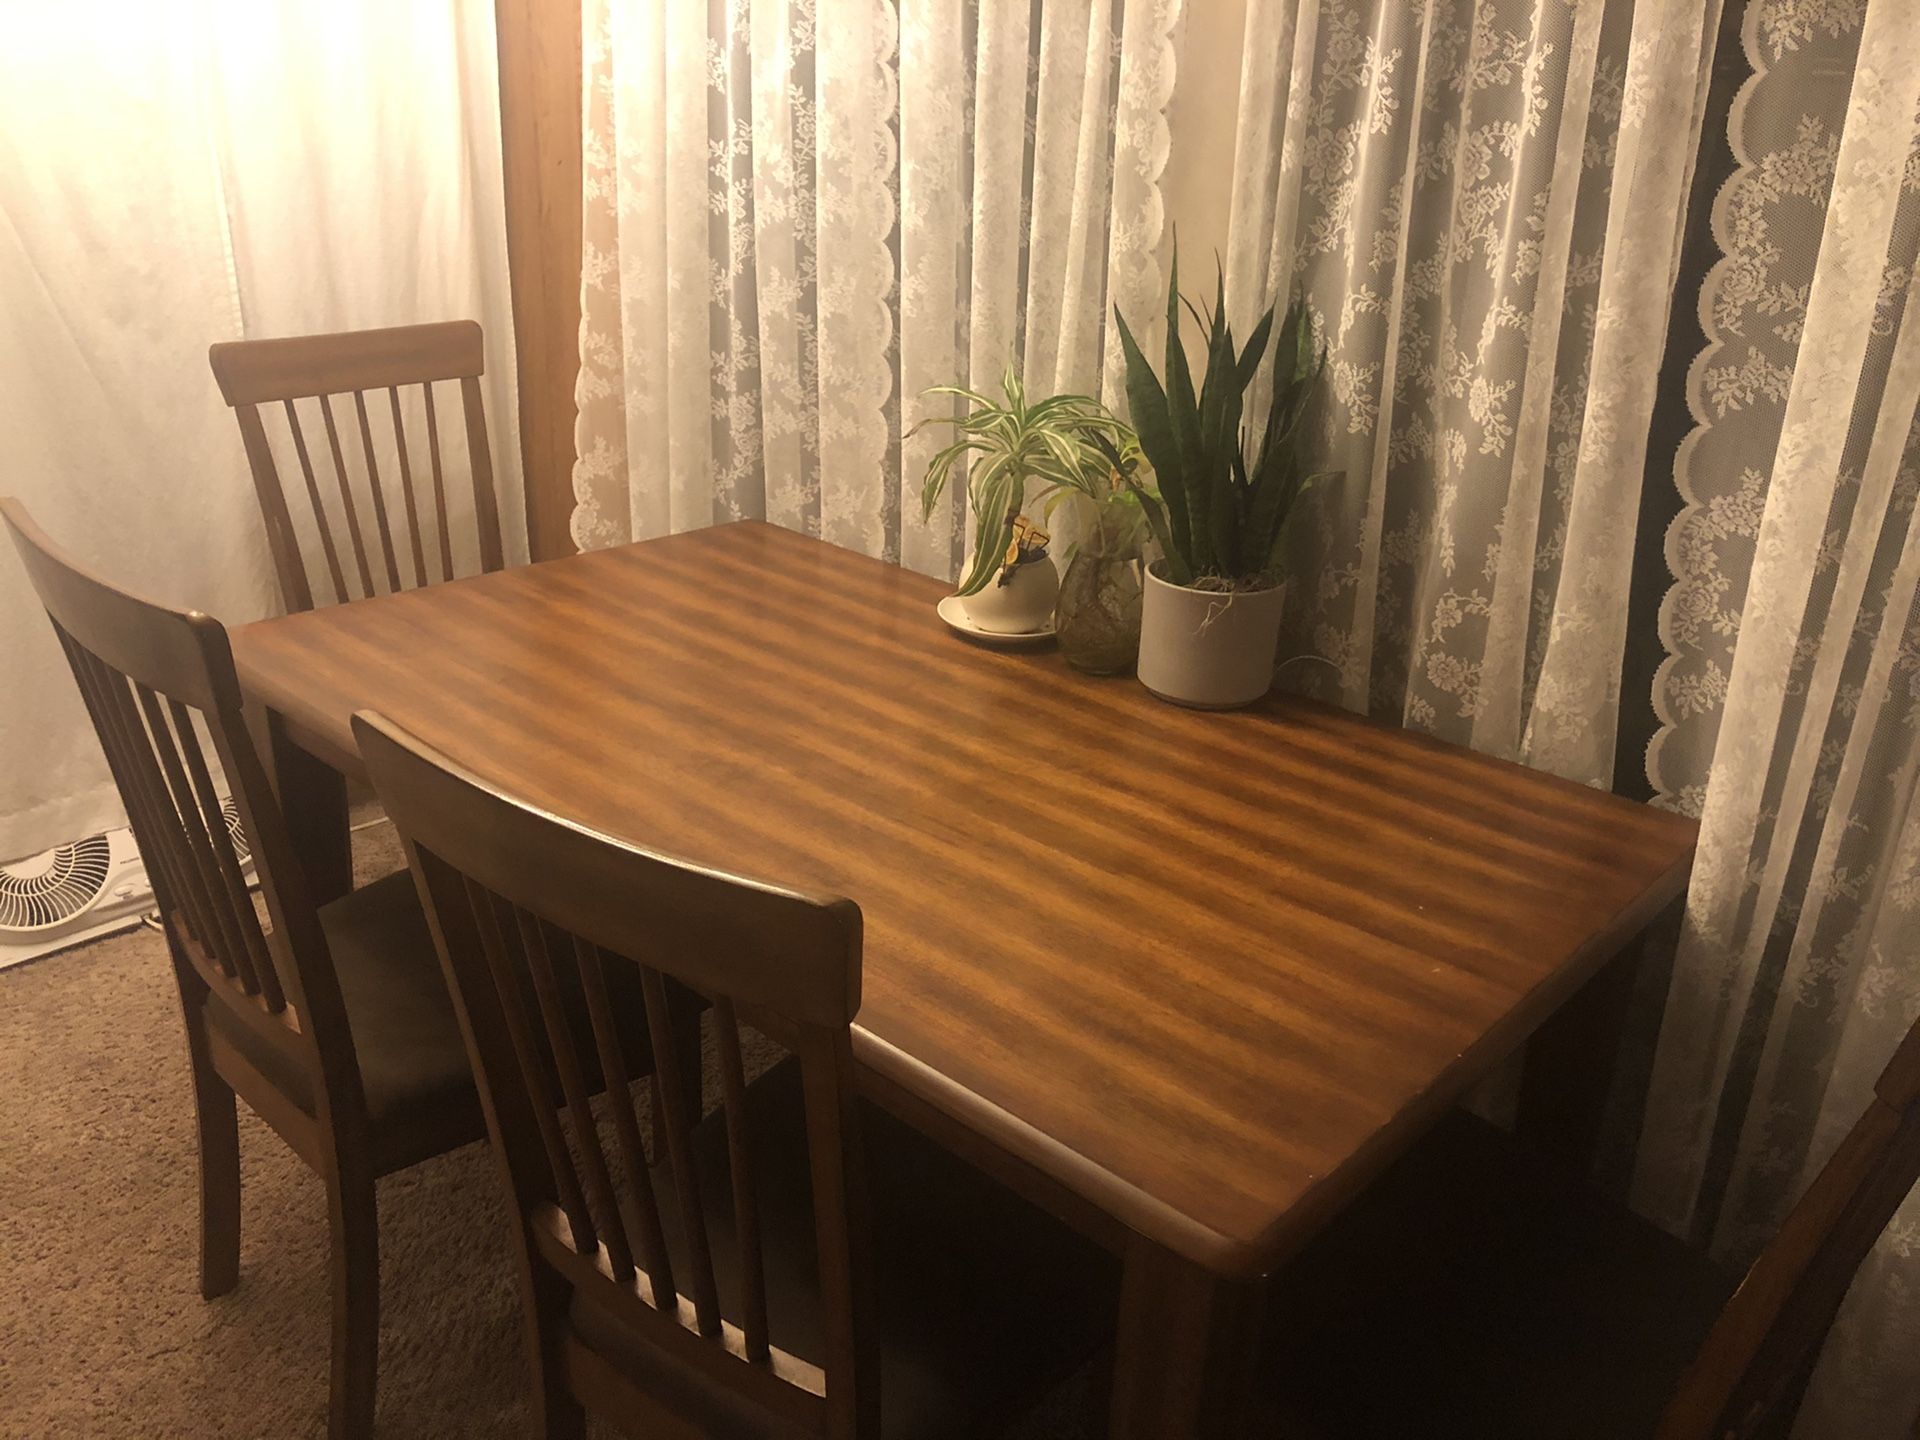 Dining Room table with 4 chairs